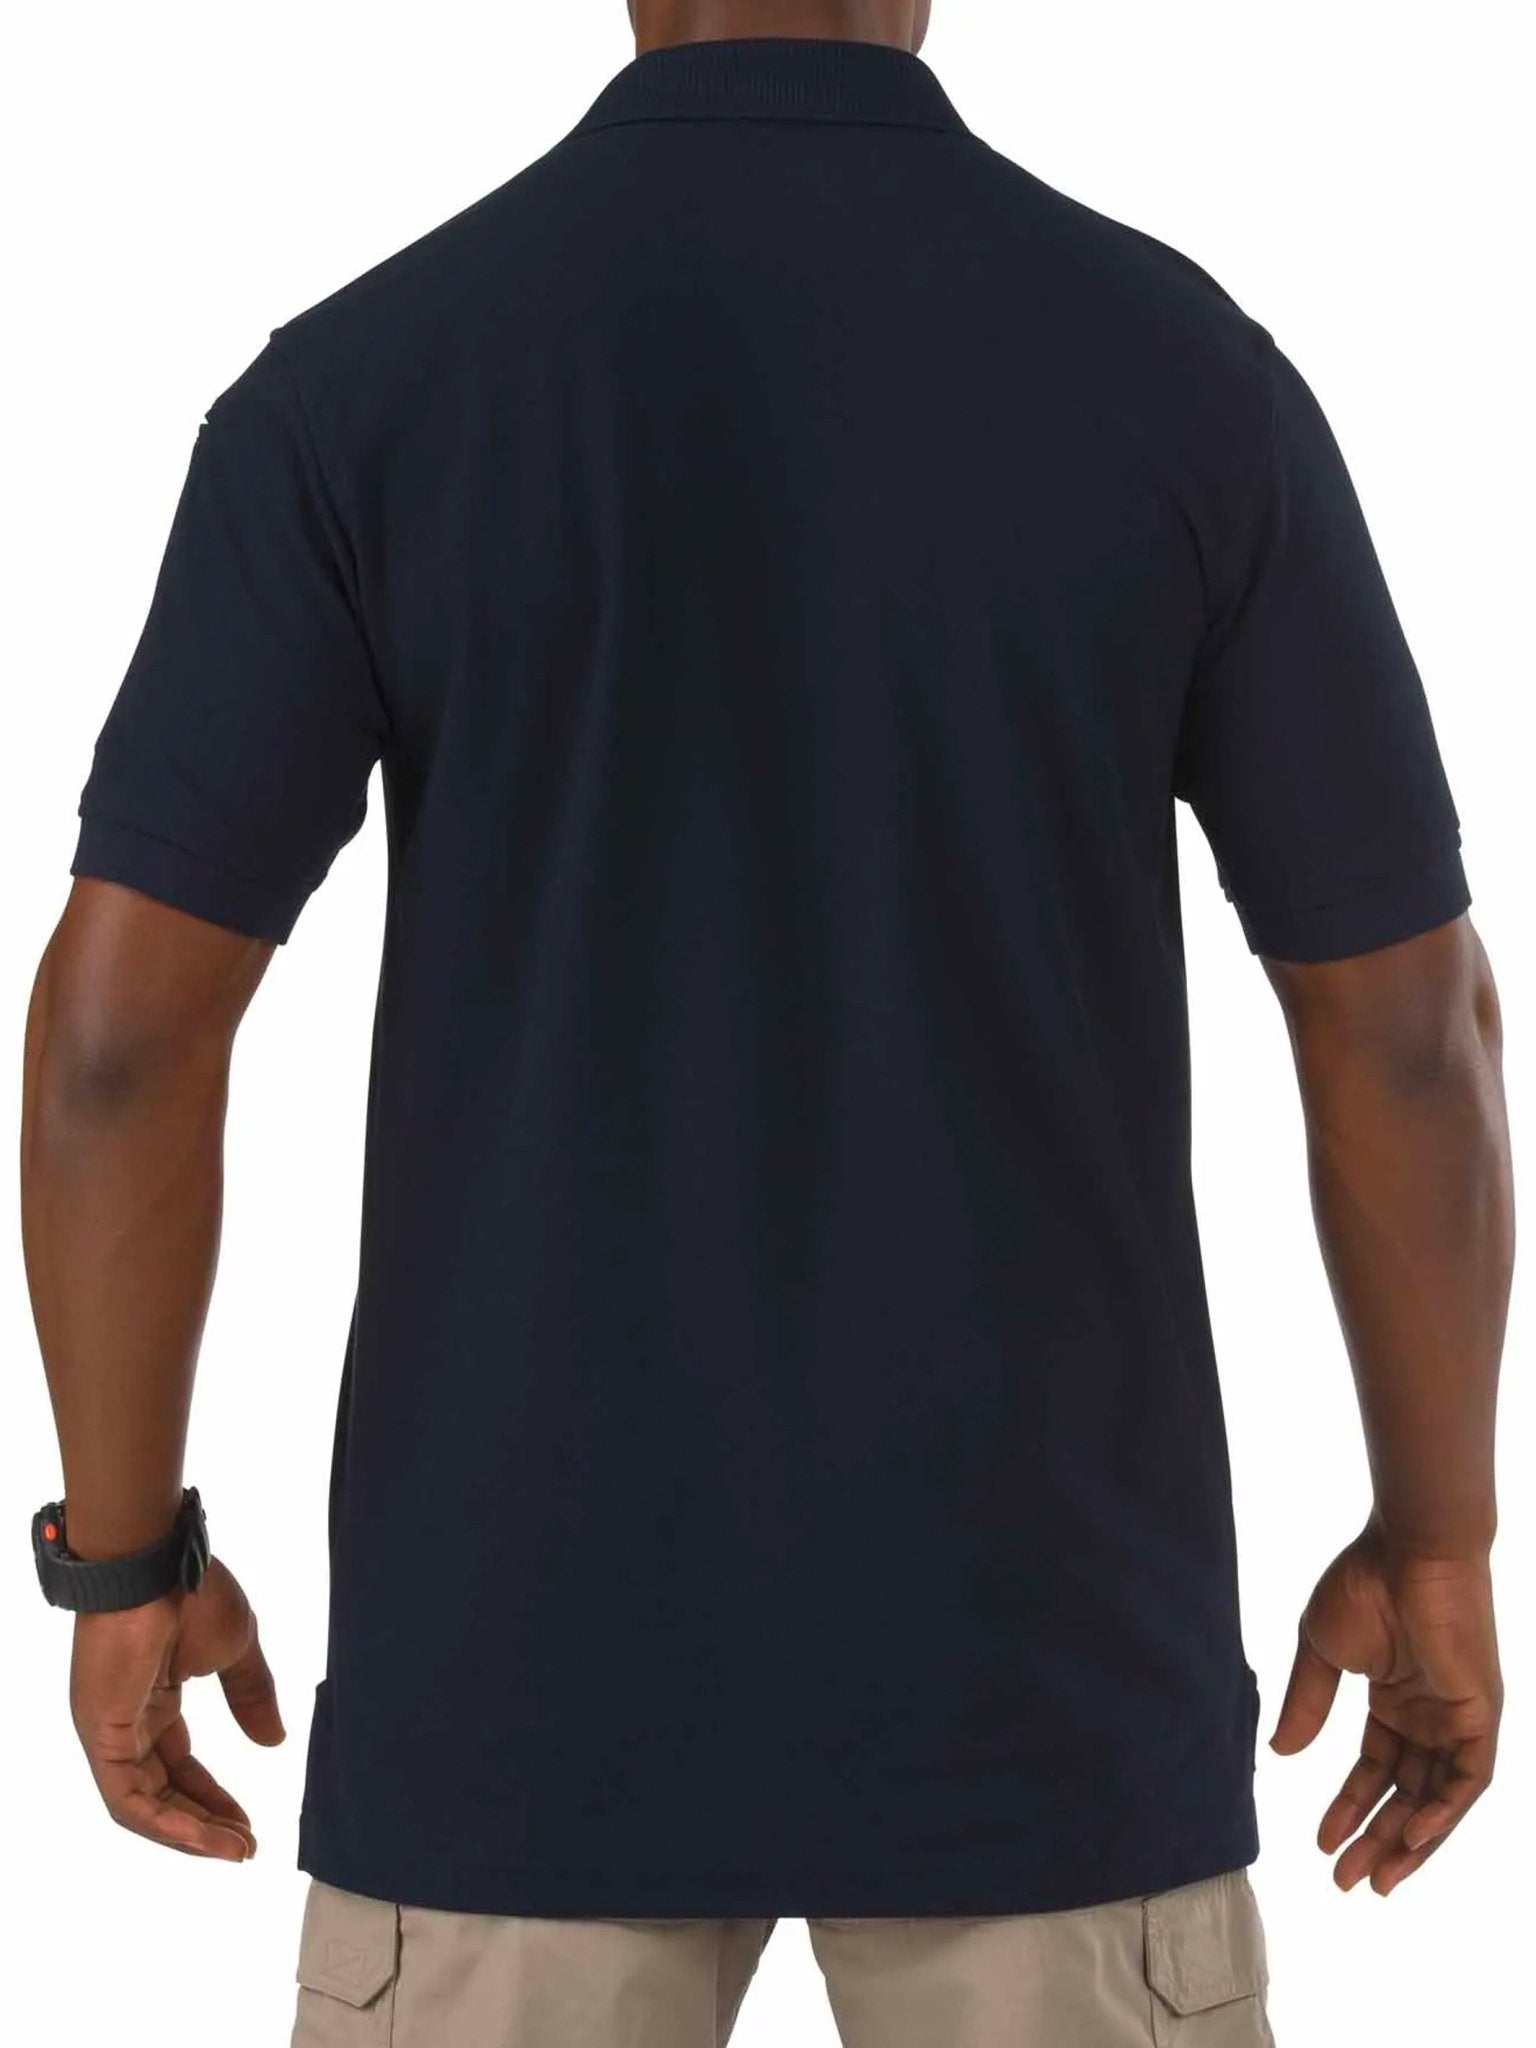 4elementsclothing5.11 Tactical5.11 Tactical - 5.11 Utility Short Sleeve Polo Shirt - Cotton / Polyester Pique - Style 41180T-Shirt41180-724-XS